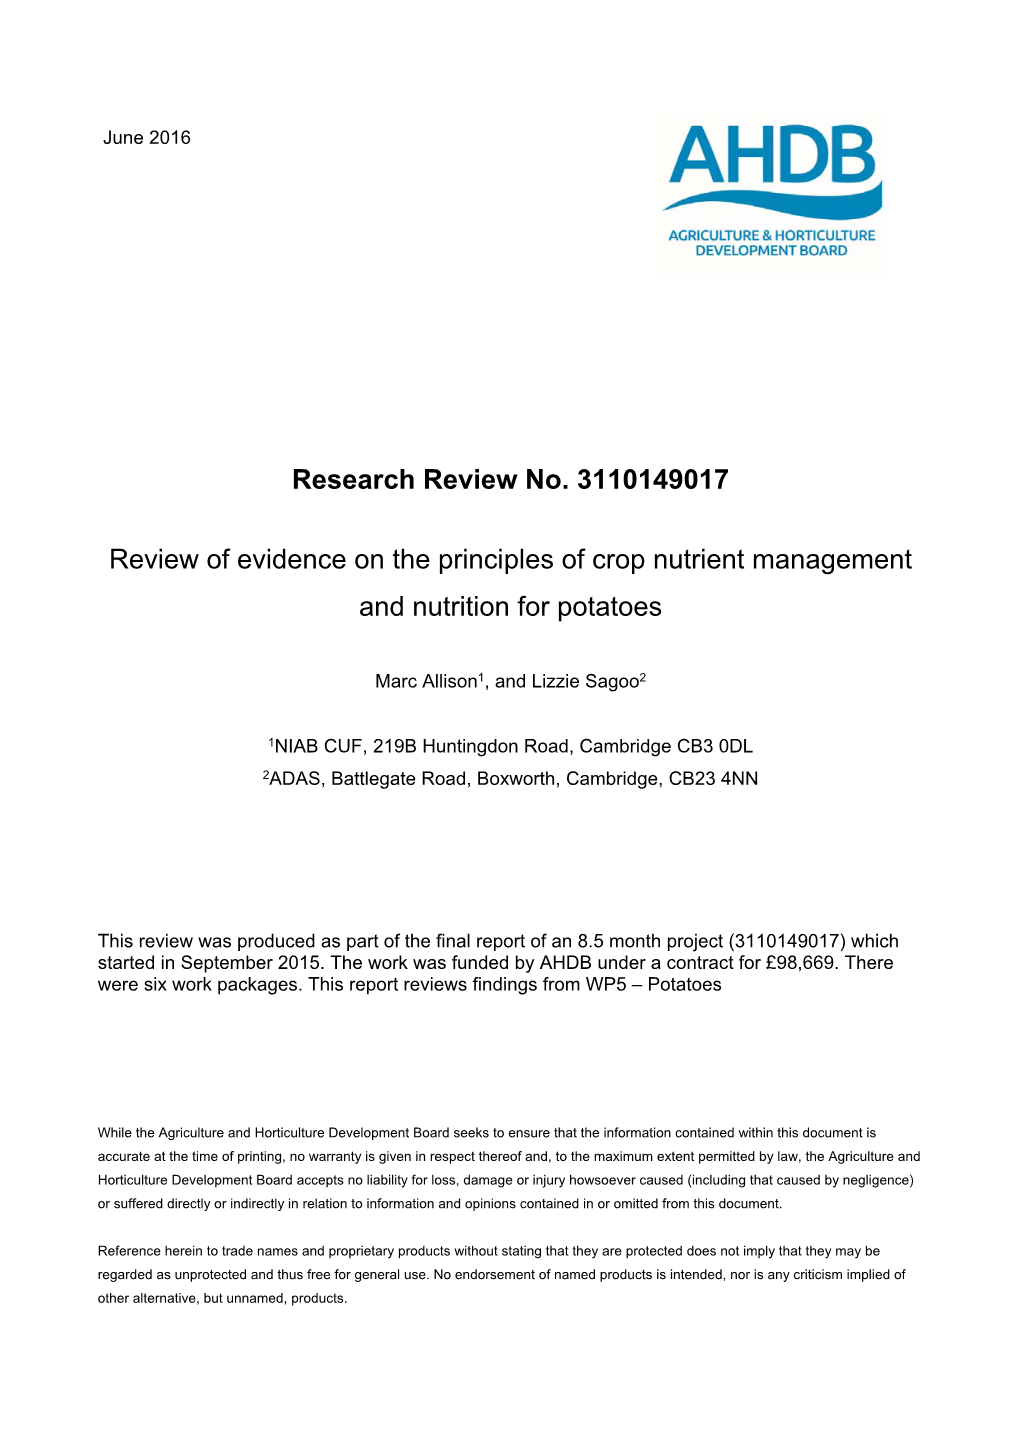 Research Review No. 3110149017 Review of Evidence on the Principles of Crop Nutrient Management and Nutrition for Potatoes